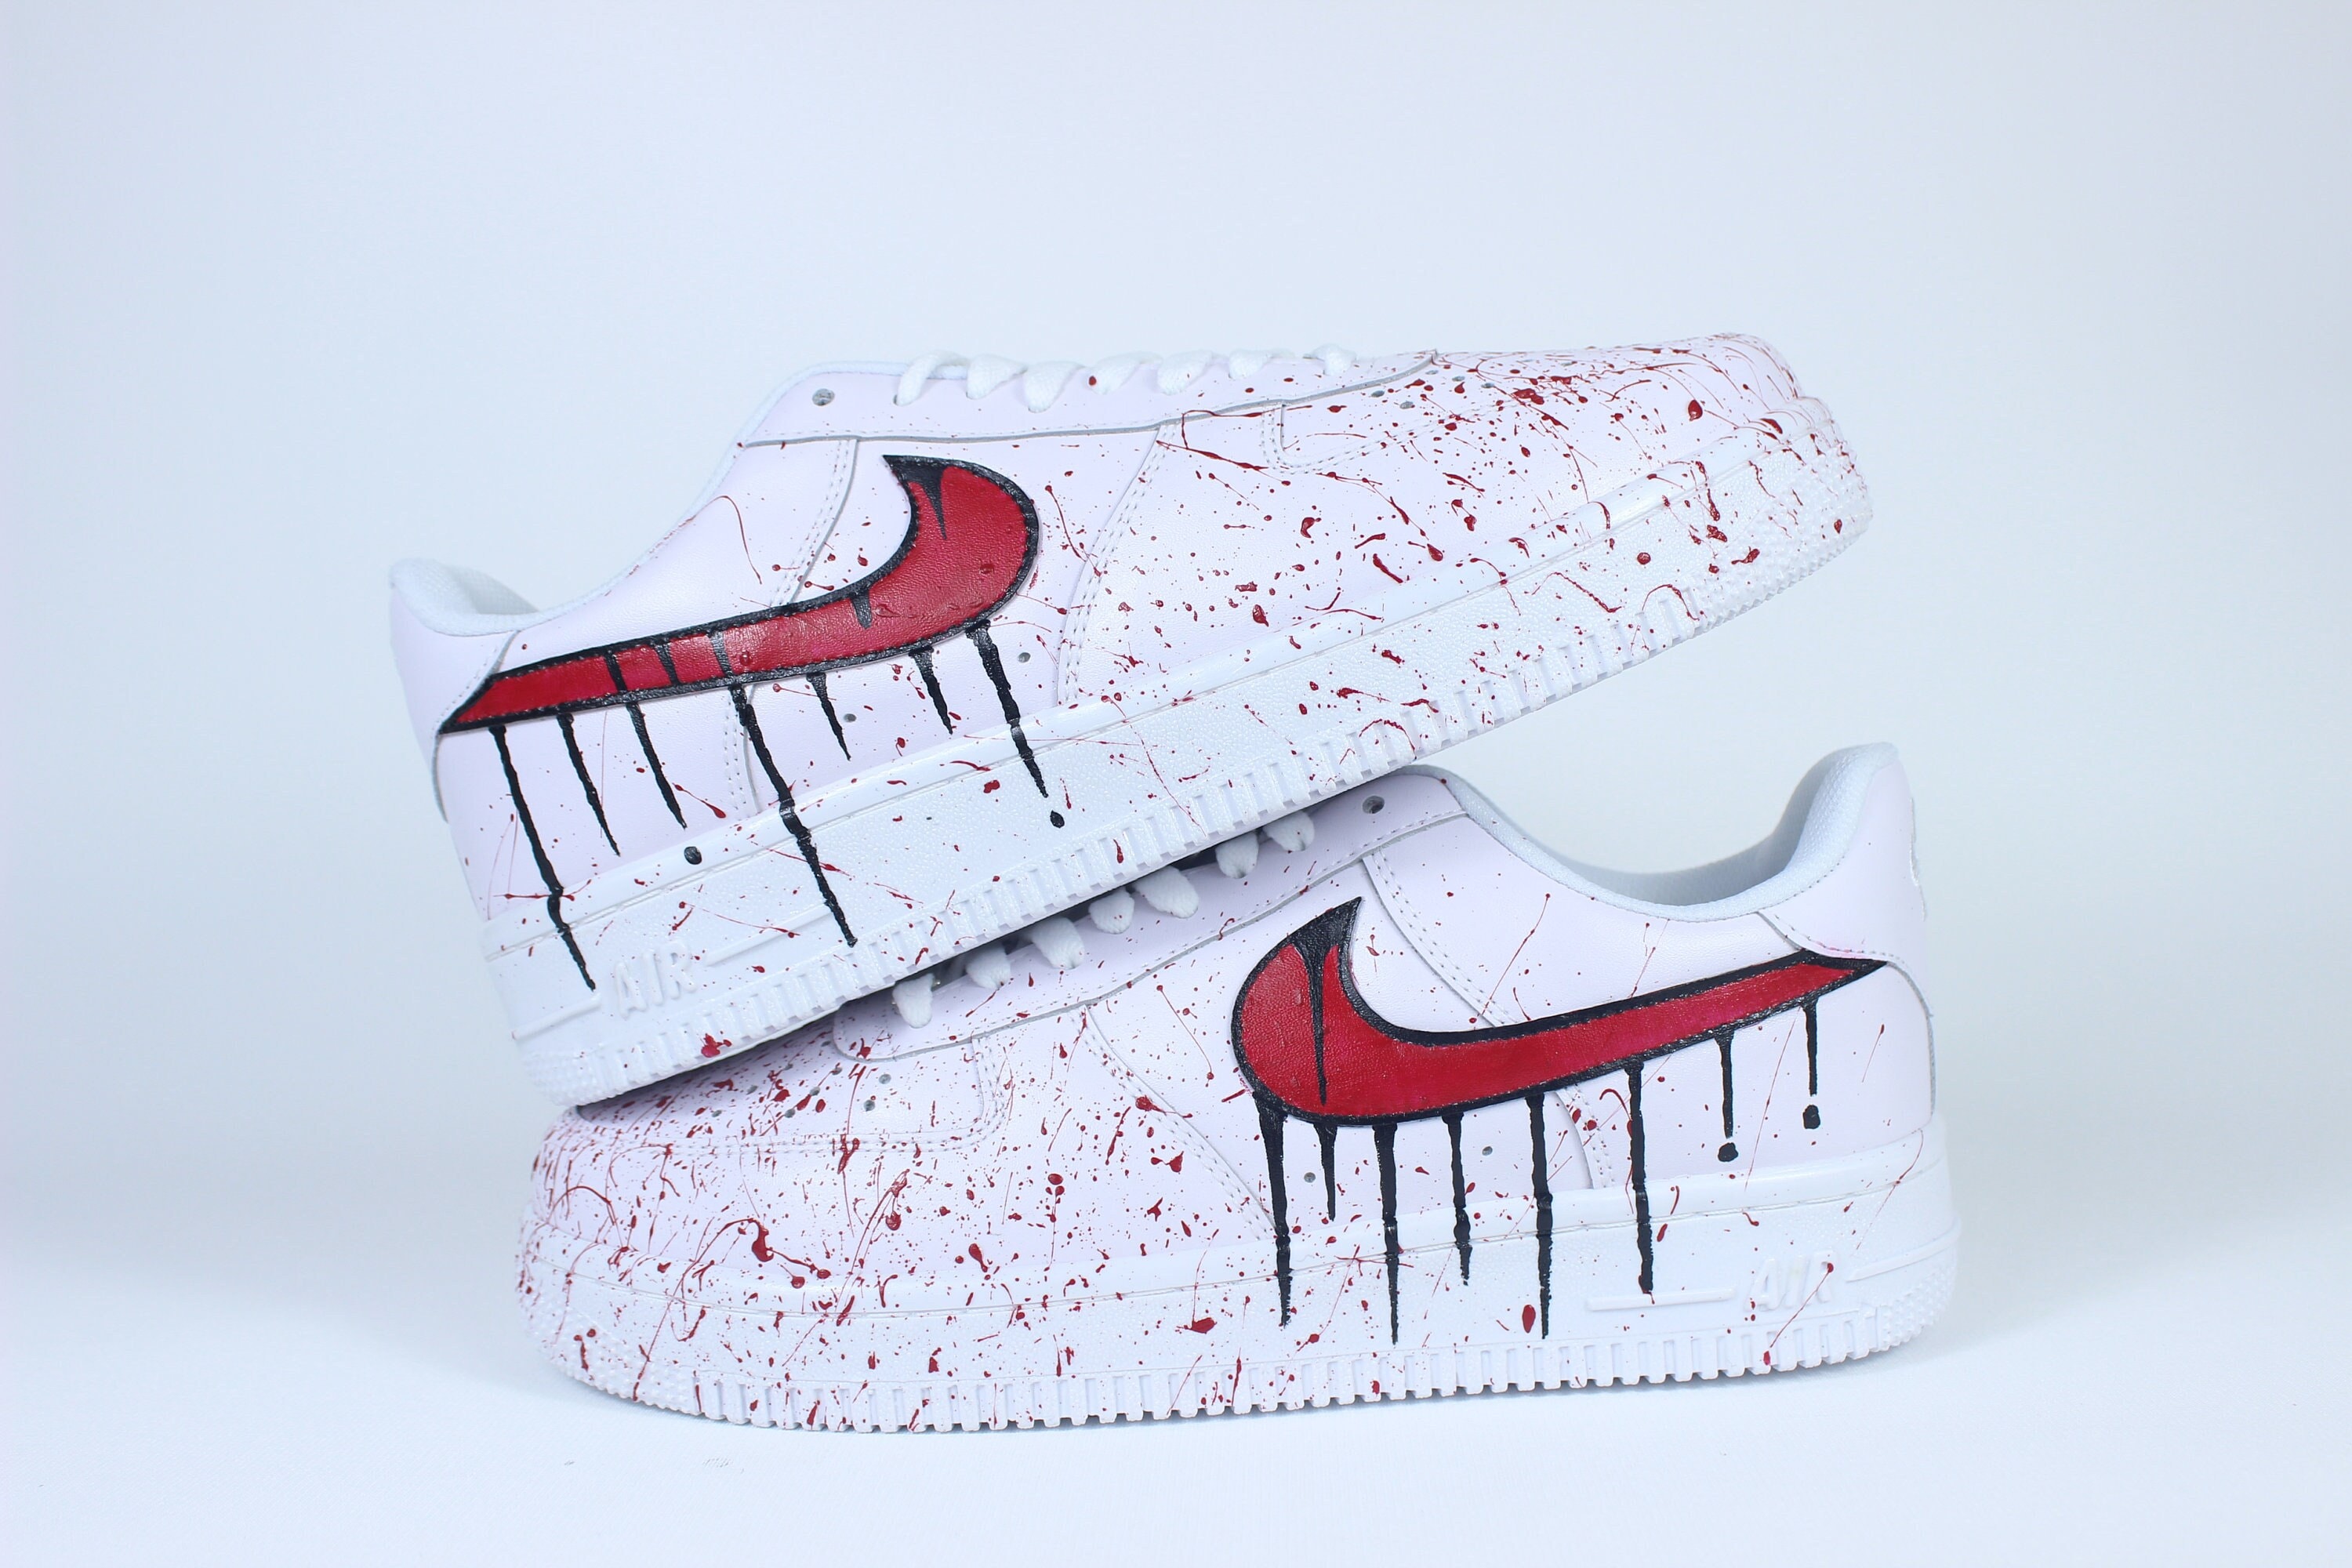 inkfactoree - Red Drip Air Force 1s 😍😍 available in all colours 🌈  #customshoes #custommade #personalizedgifts #custom #nike #nikeshoes  #nikeairforce1 #airforce1 #airforcecustom #red #drip #reddrip #customised  #customsne